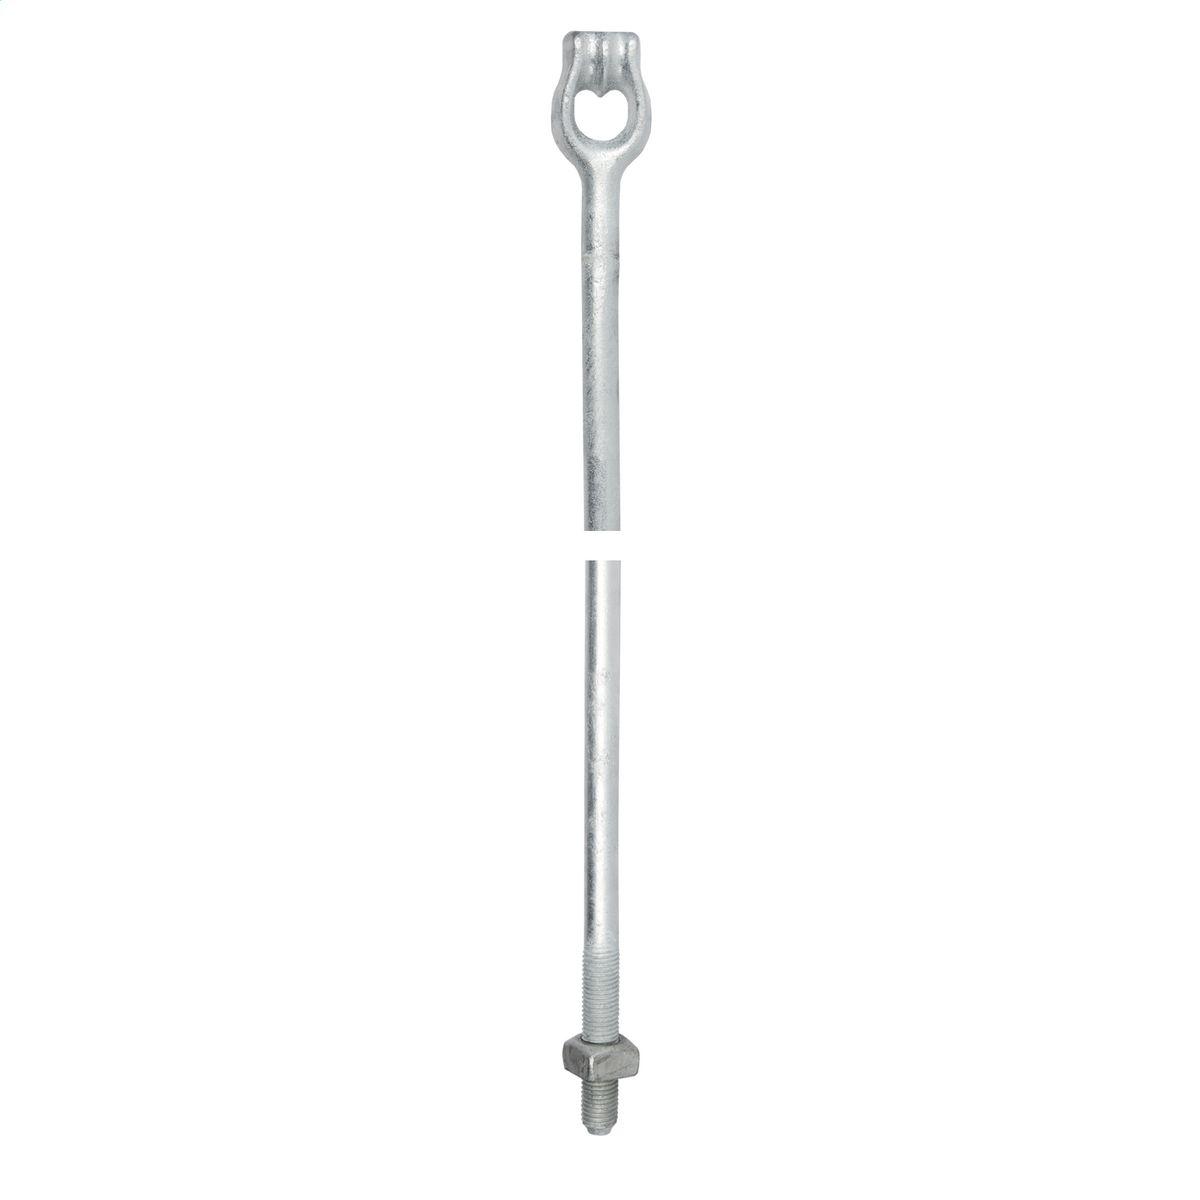 Hubbell 5359 Expanding/Cross-Plate Anchor Rod 0.75" (19.1 mm) Diameter Rod, 9' (2743 mm) long with Twineye.  ; Thimbleye®, Twineye® and Tripleye® drop forged eye distribute pulling stresses uniformly over individual strands of guy wire and keep the guy wire from sprea